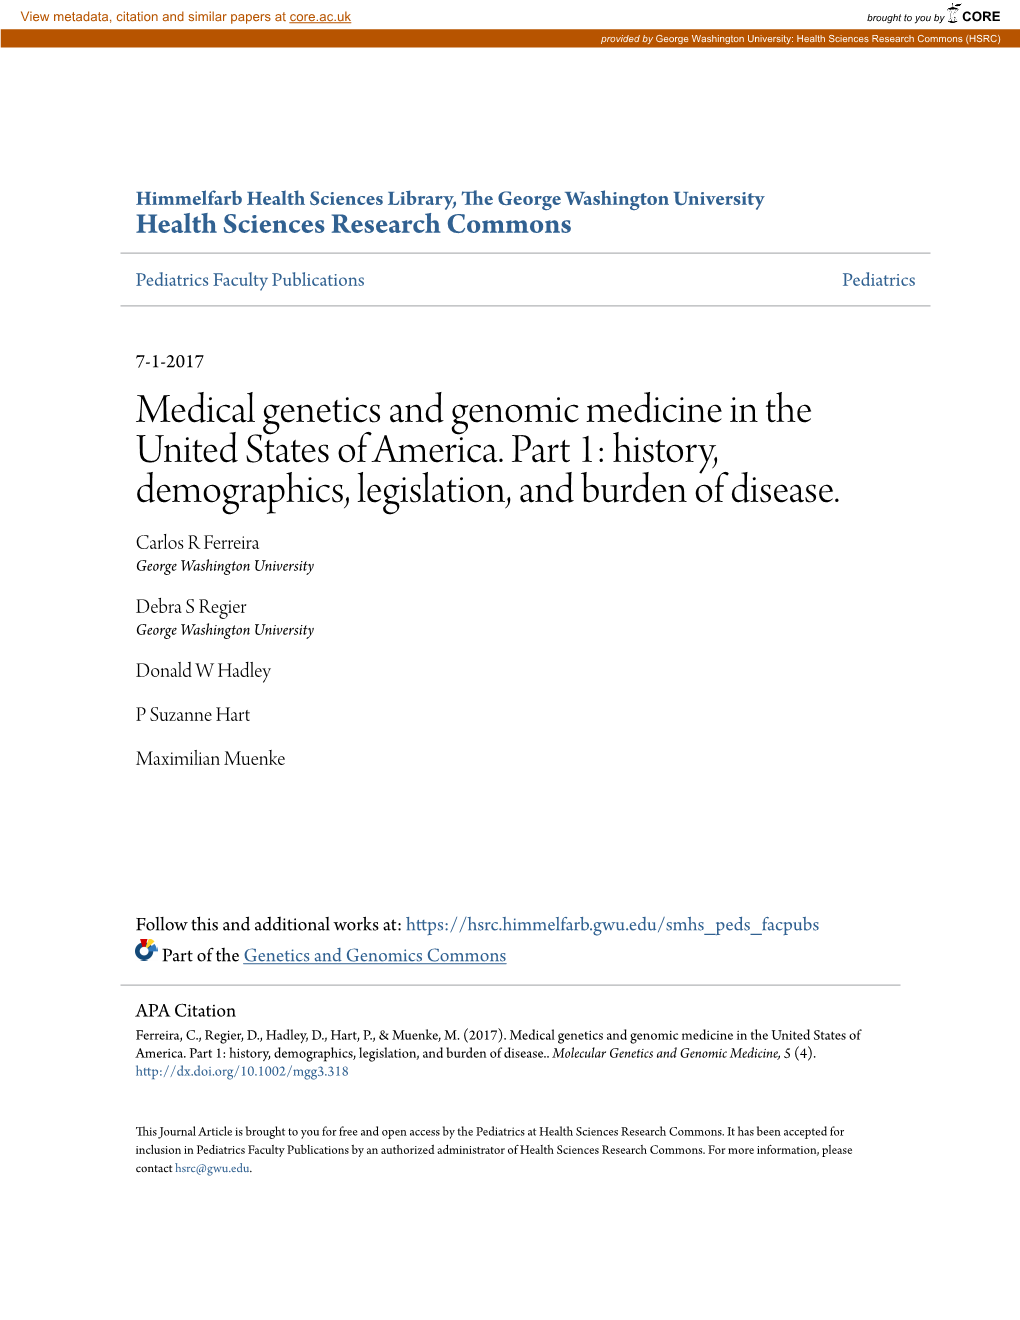 Medical Genetics and Genomic Medicine in the United States of America